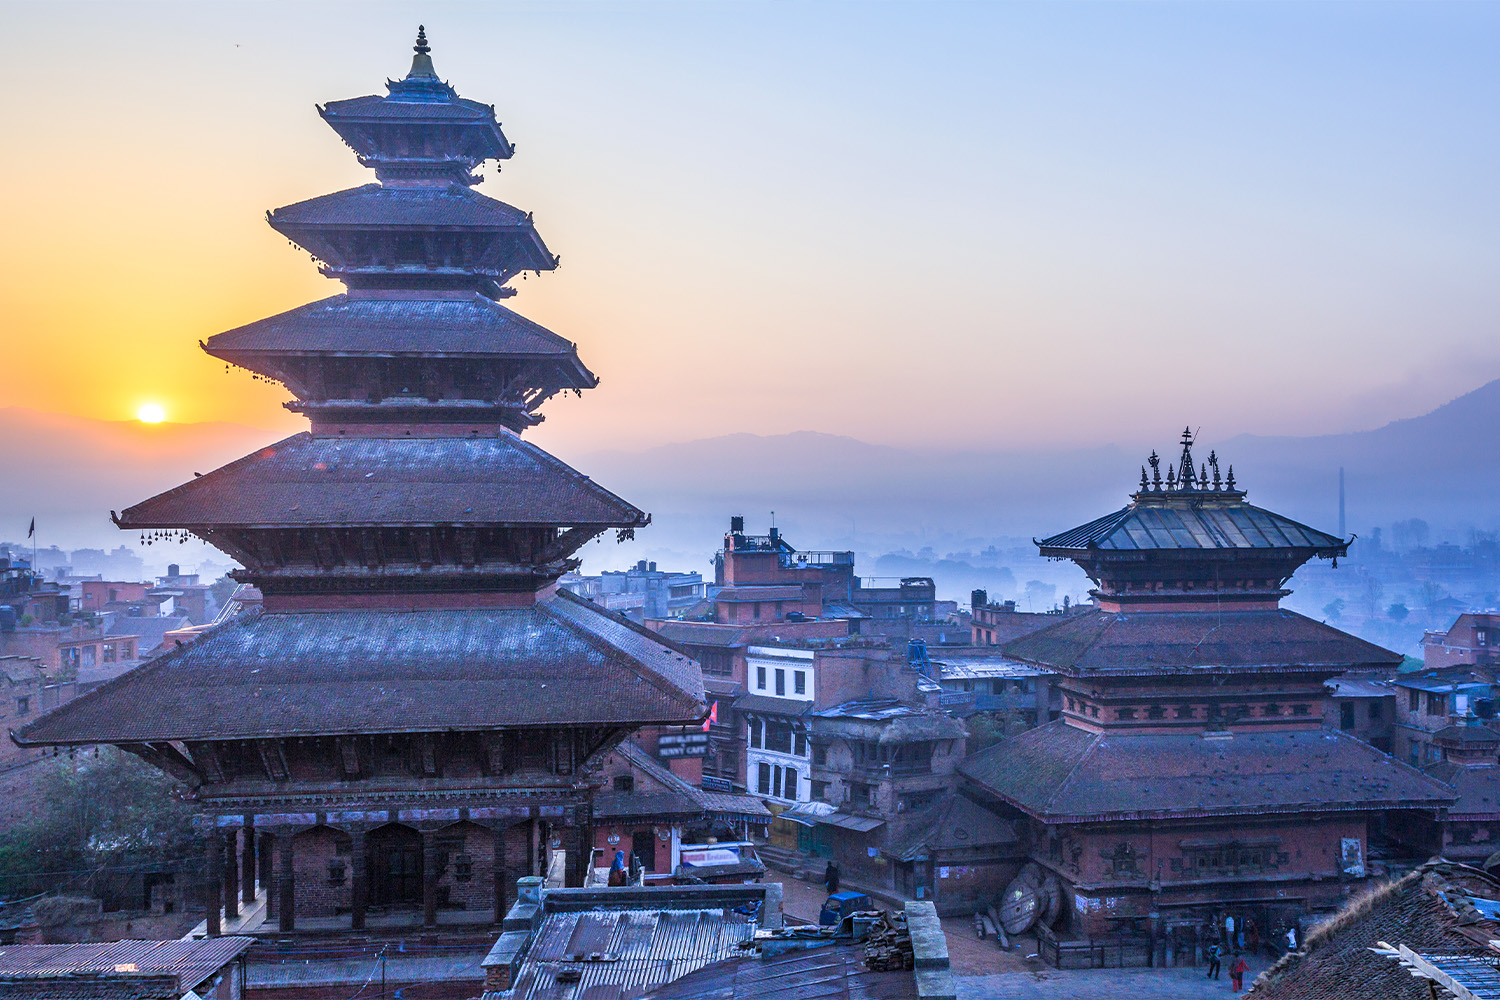 Discovering the Capital of Nepal